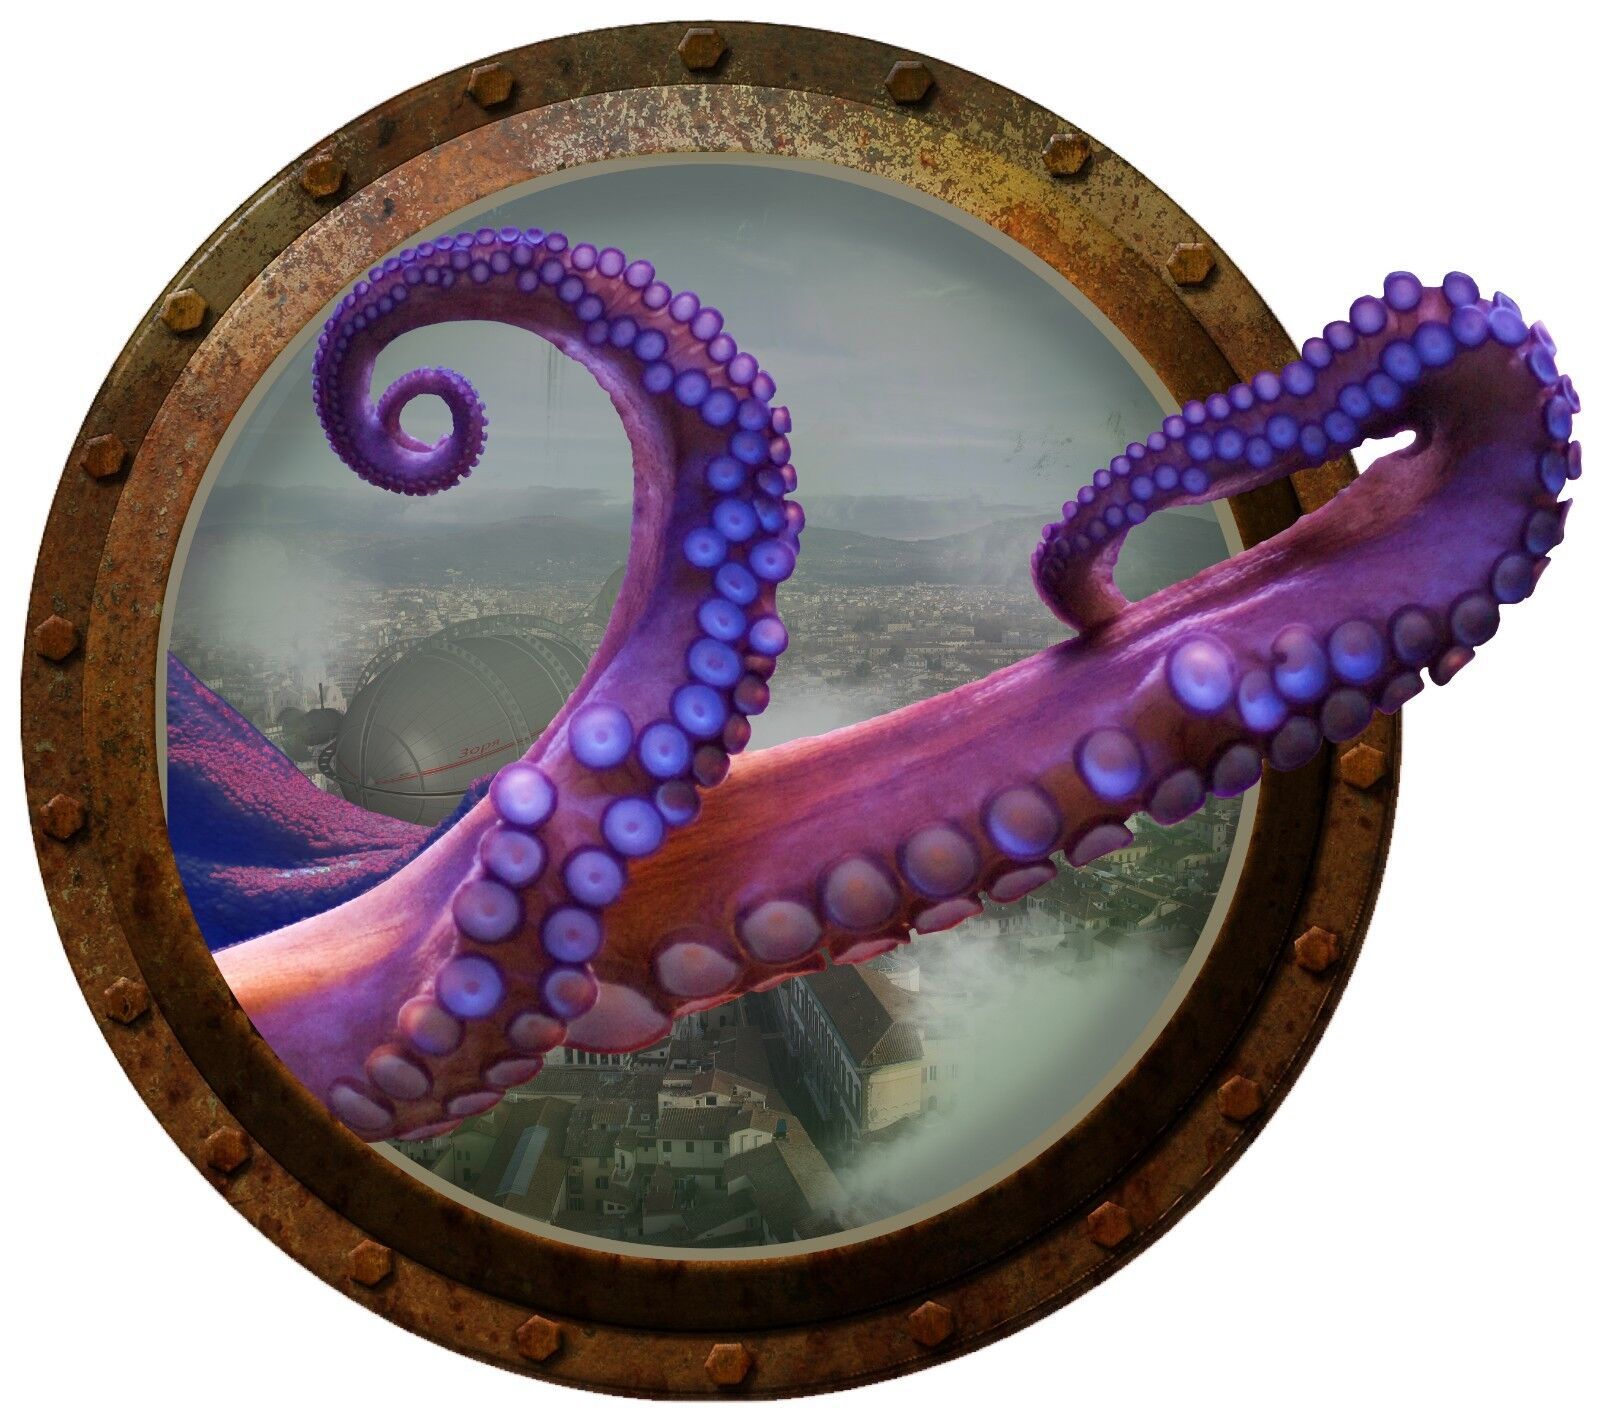 Steampunk Octopus Porthole Wall Decal - $11.88 - $41.58